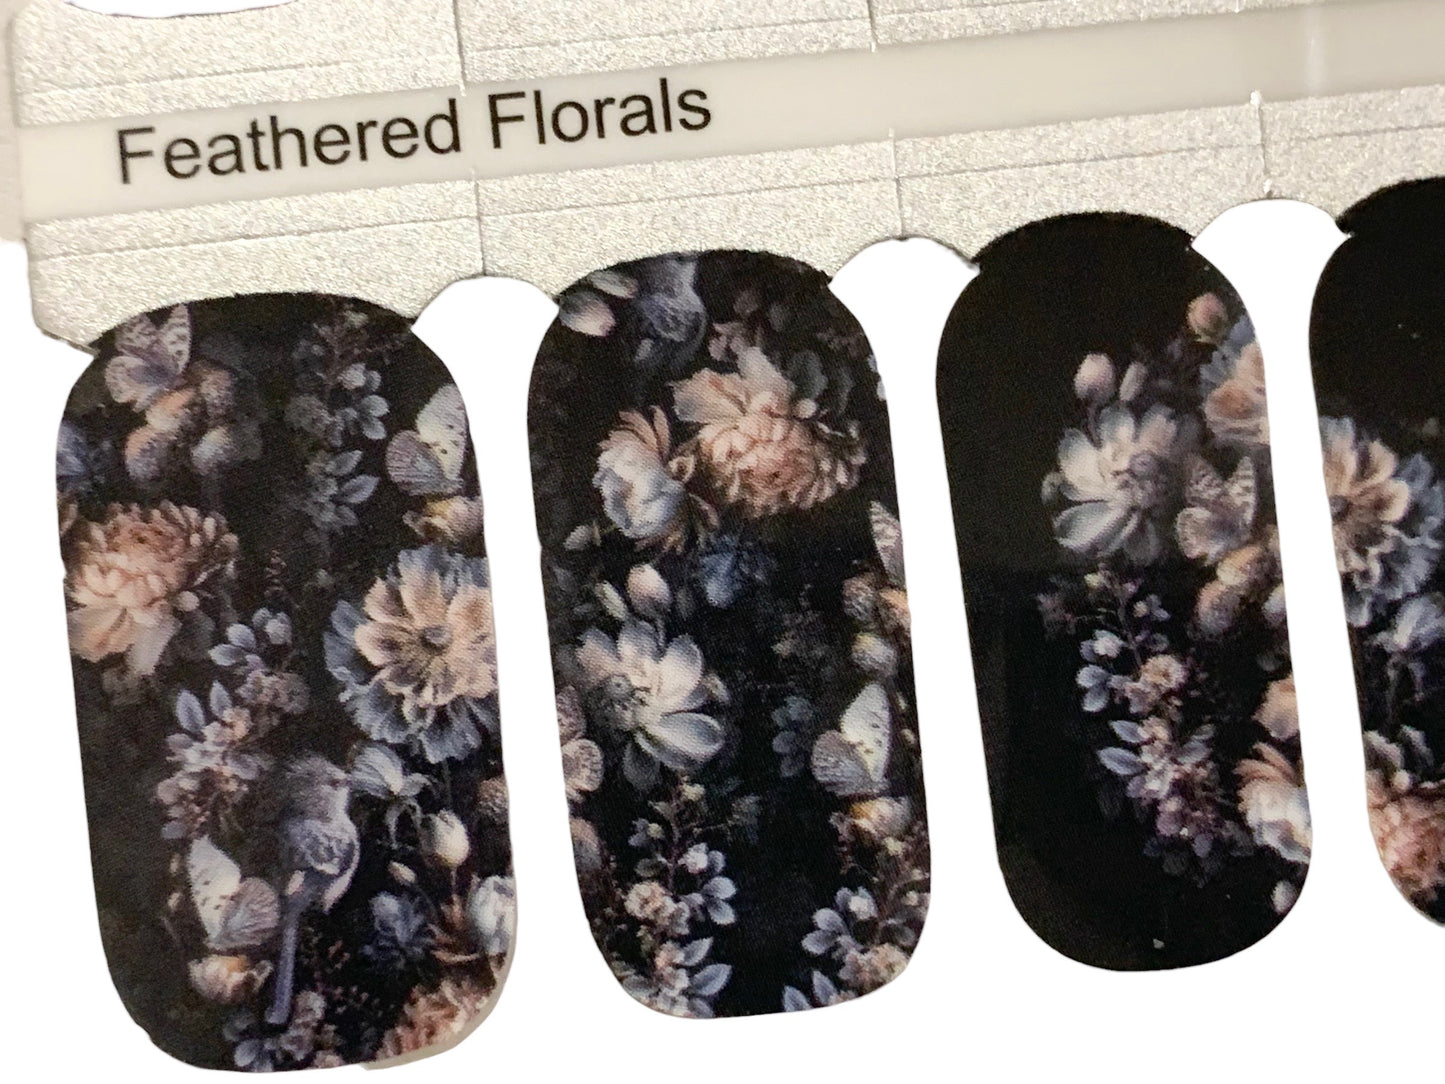 Feathered Florals